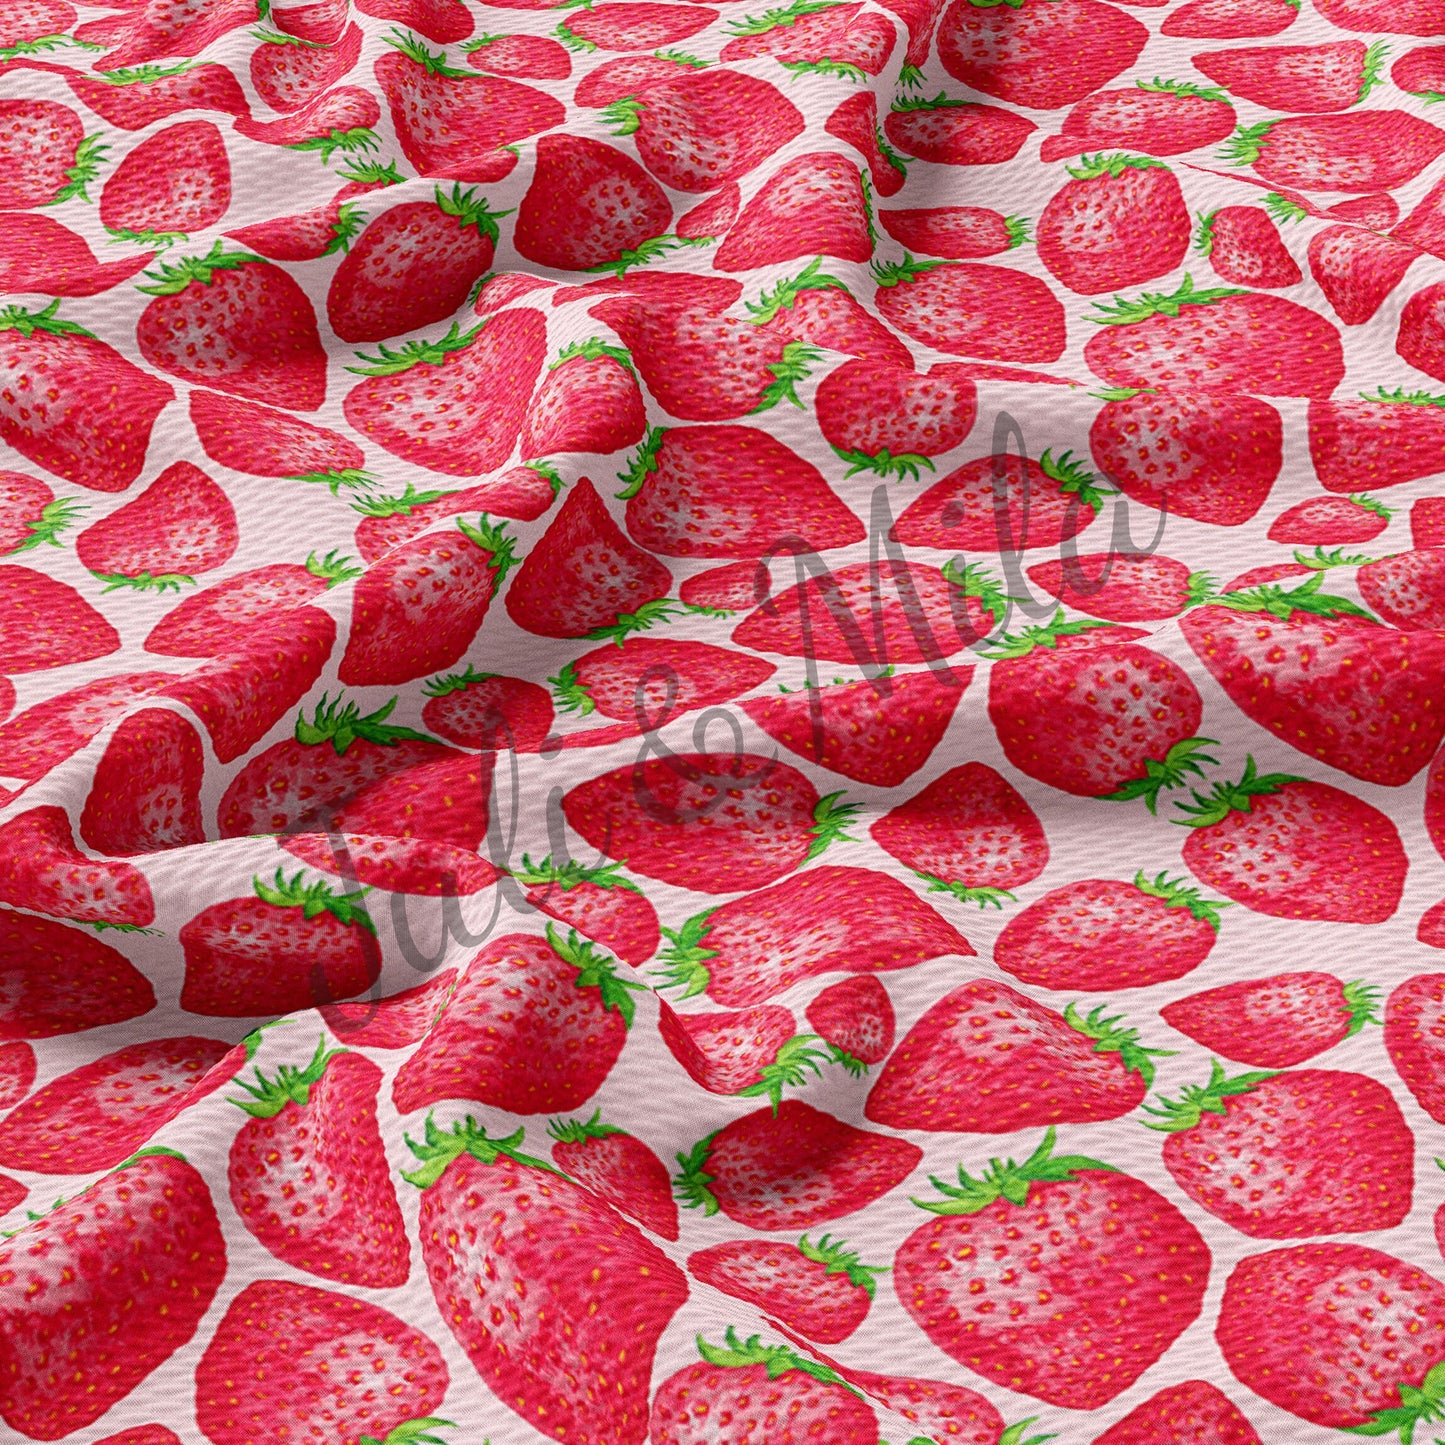 Strawberry Printed Liverpool Bullet Textured Fabric by the yard 4 Way Stretch Solid Strip Thick Liverpool Fabric Strawberry